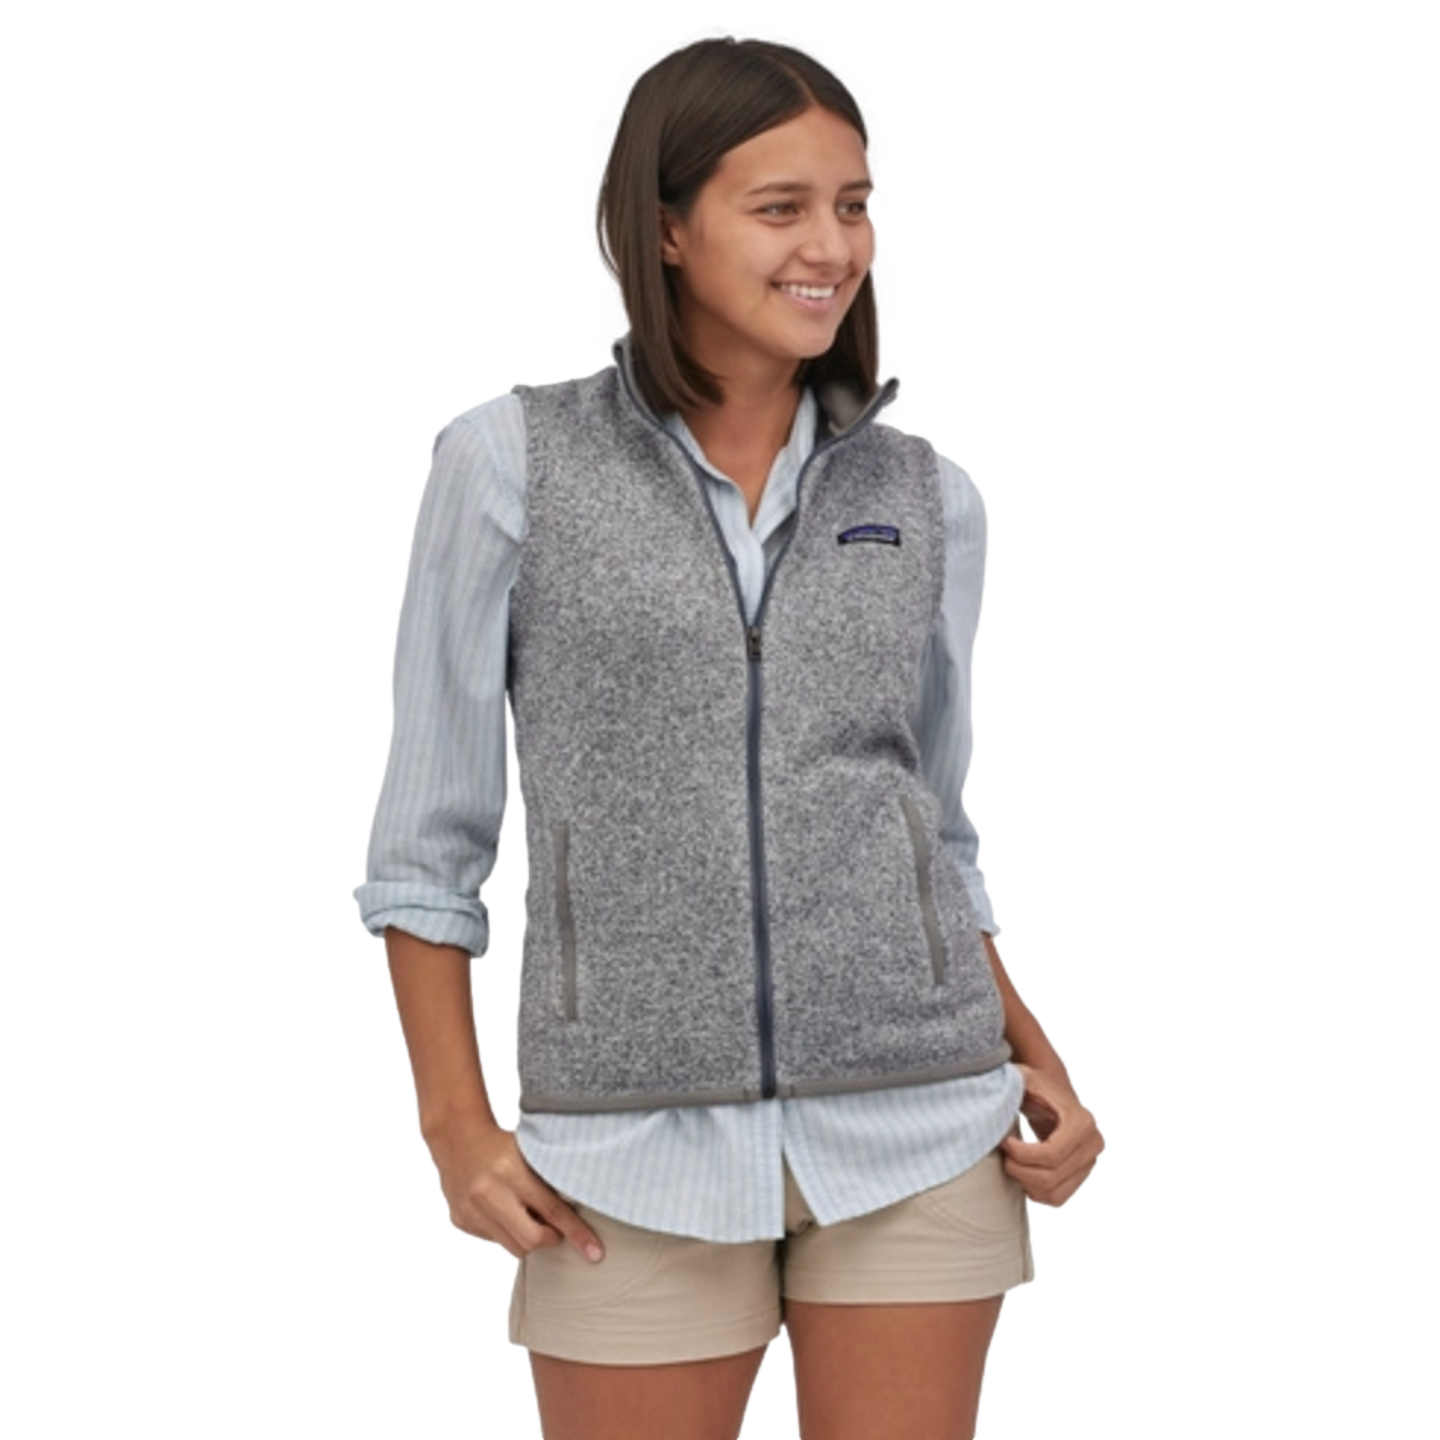 Patagonia Women's Better Sweater Vest--City Sports